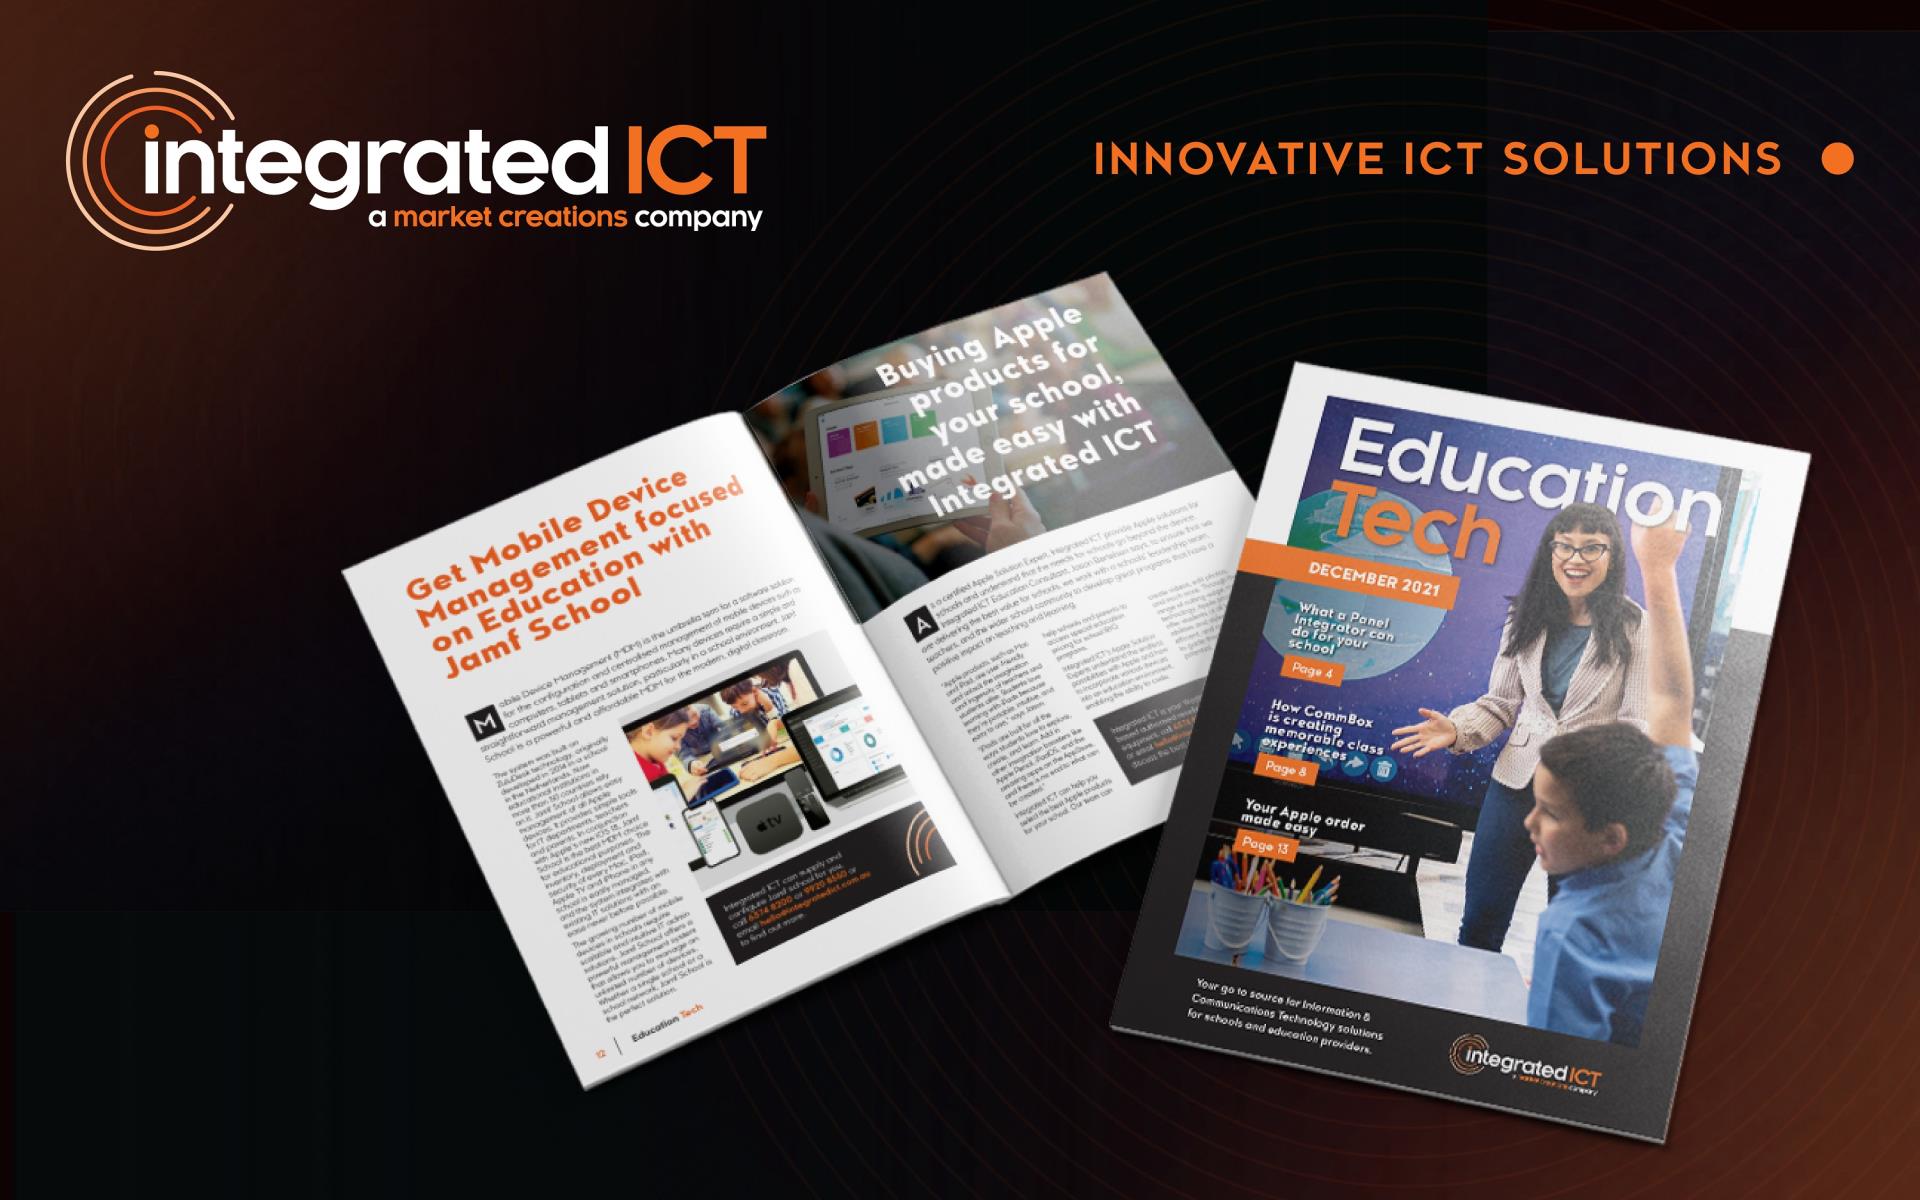 Education Tech - a new magazine for schools and education providers